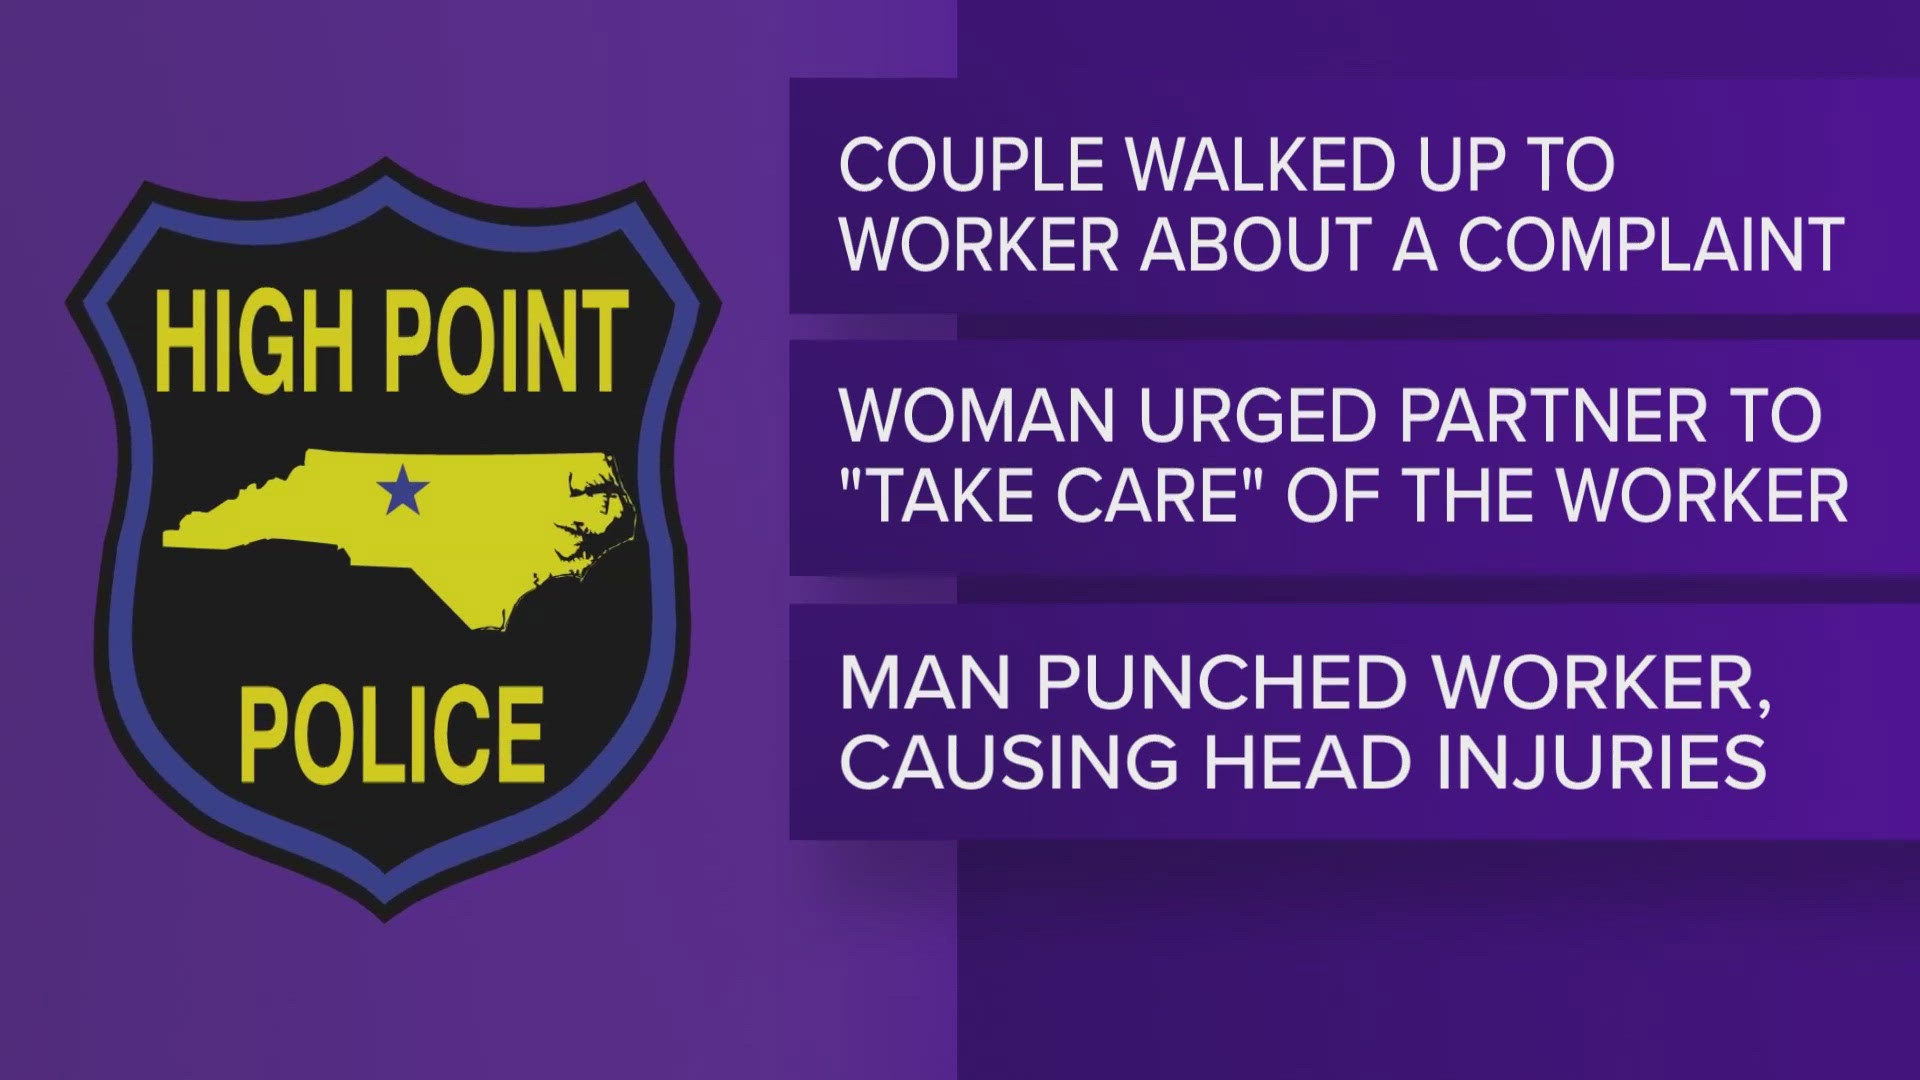 Police said the man punched the Walmart employee, knocking him to the ground.